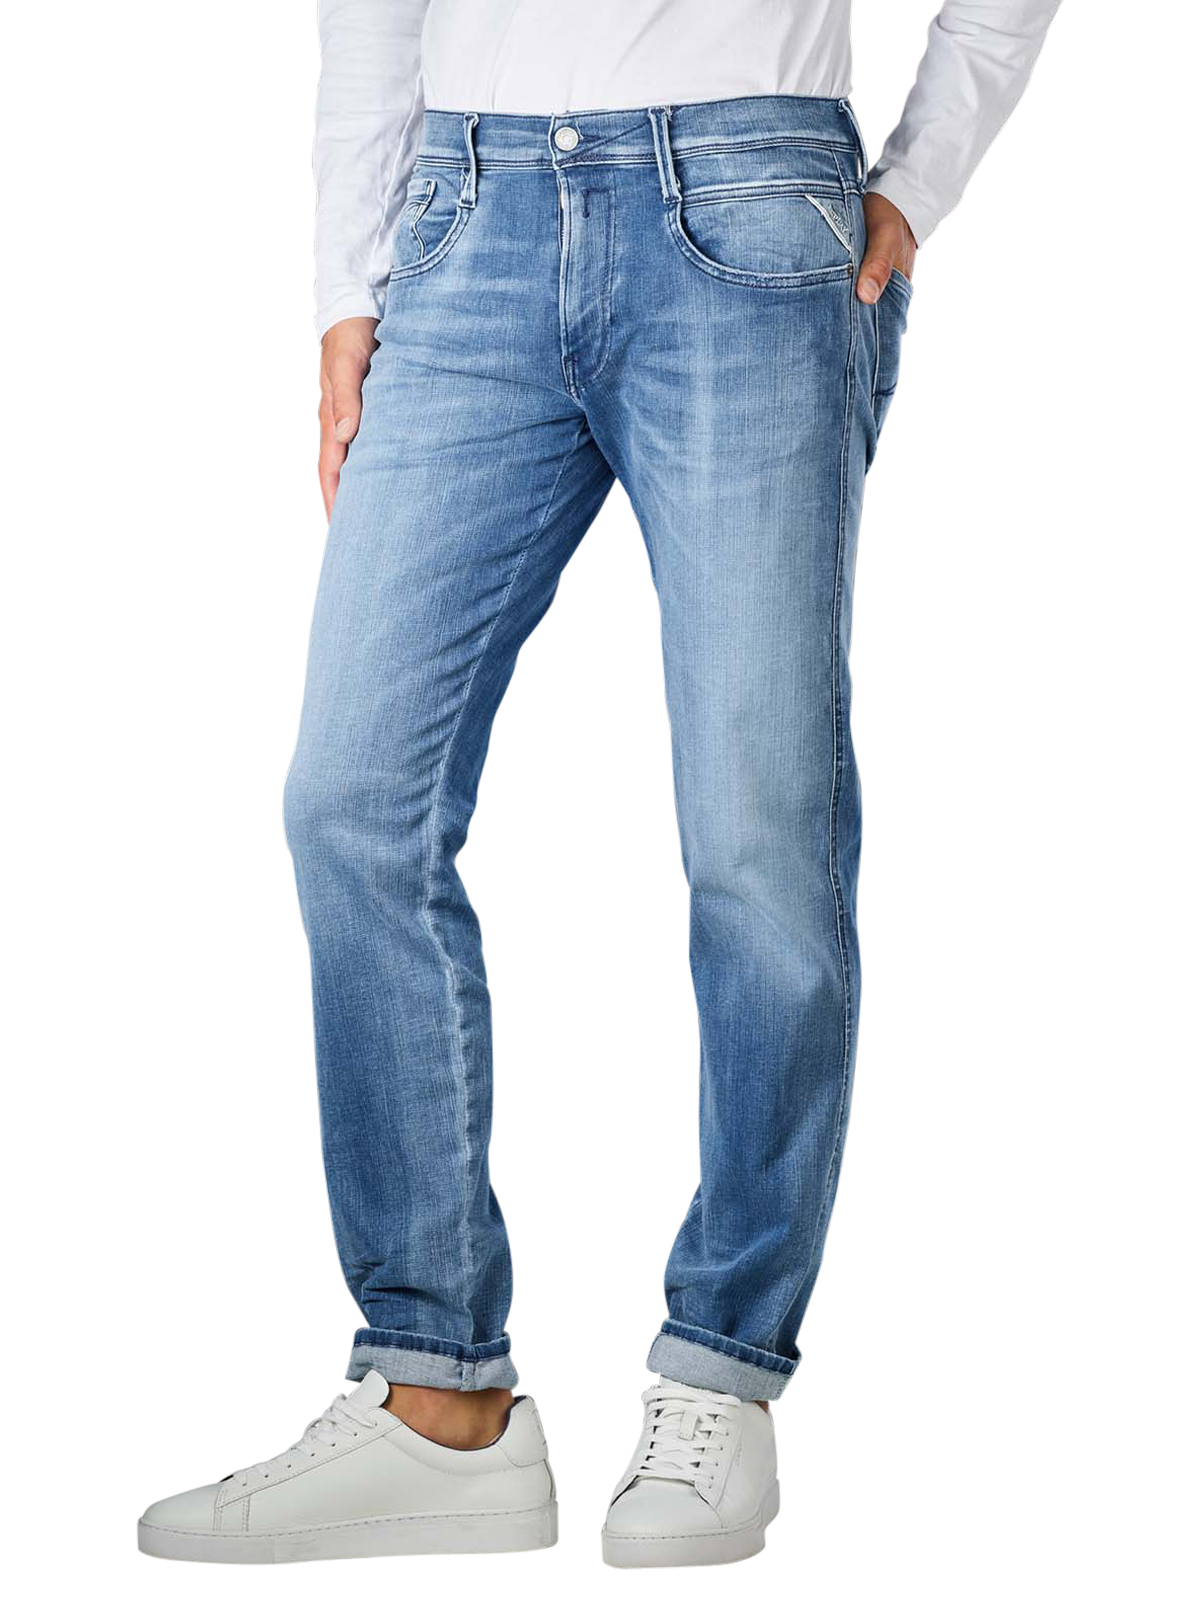 1160-replay-men-jeans-blue-denim-straight-fit-m914y-661-wi6-010-s.png